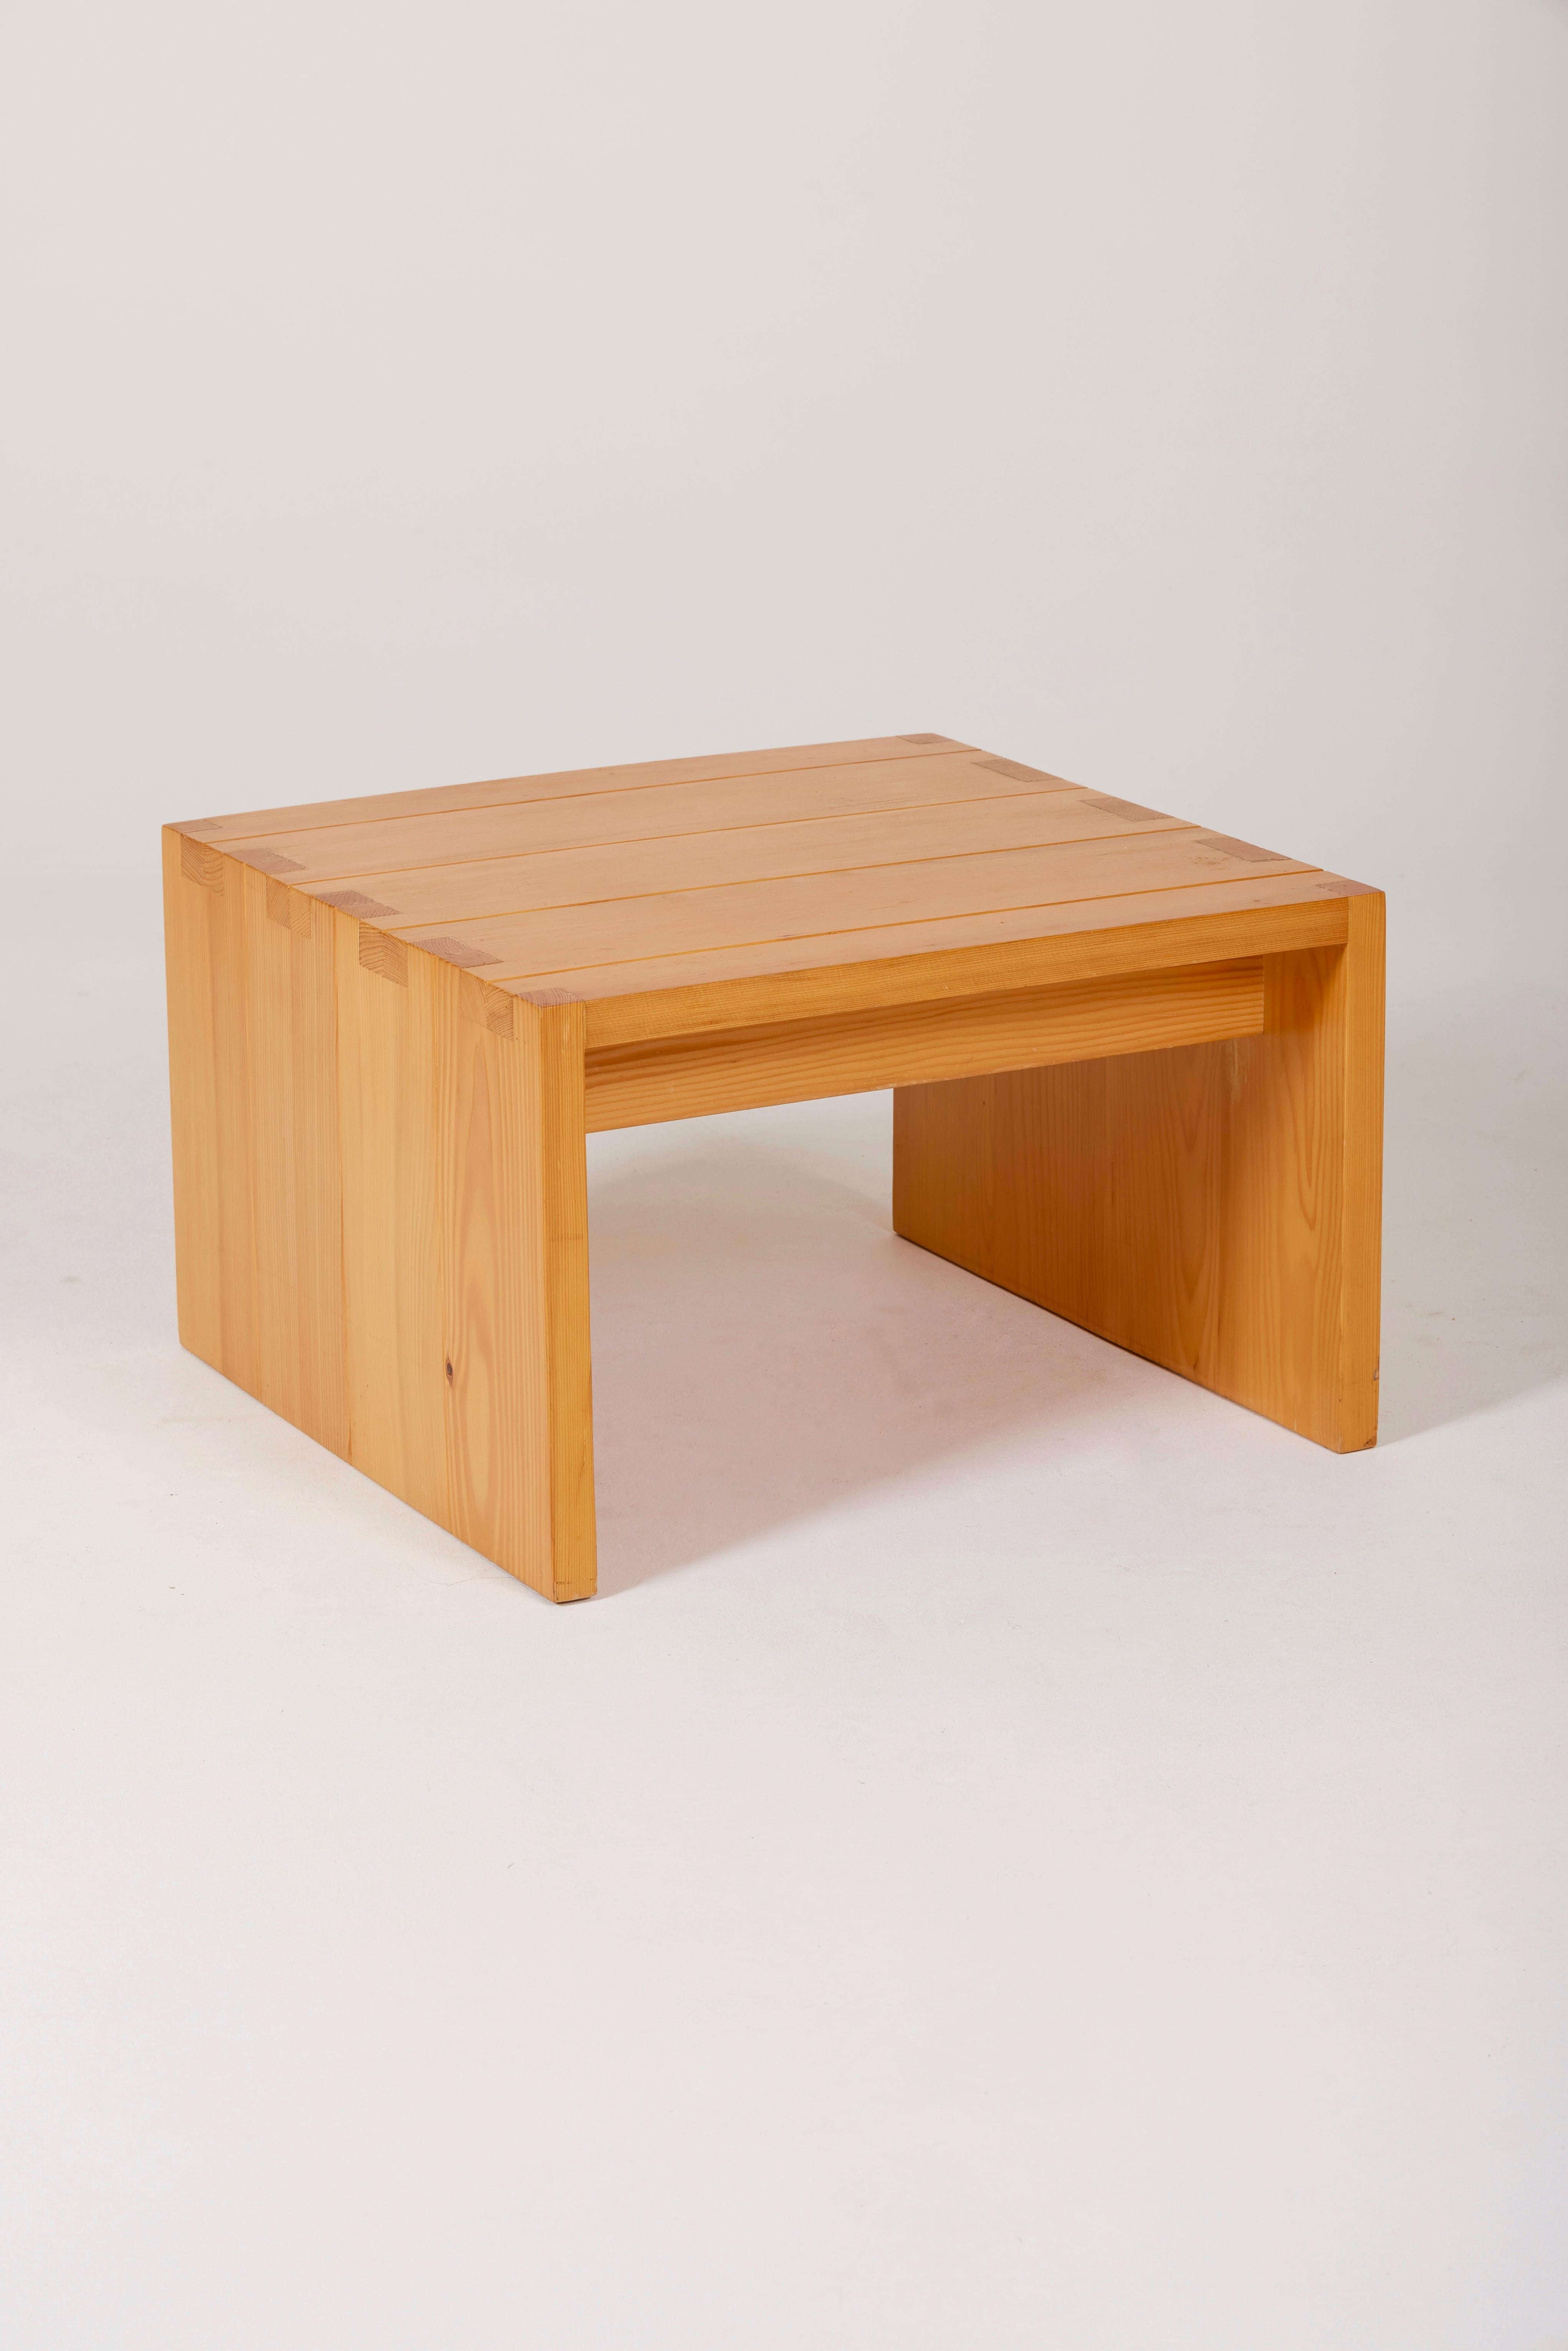 Solid pine coffee table by the designer Roland Haeusler for the Regain house in the 1960s. Beautiful condition.

LP1137